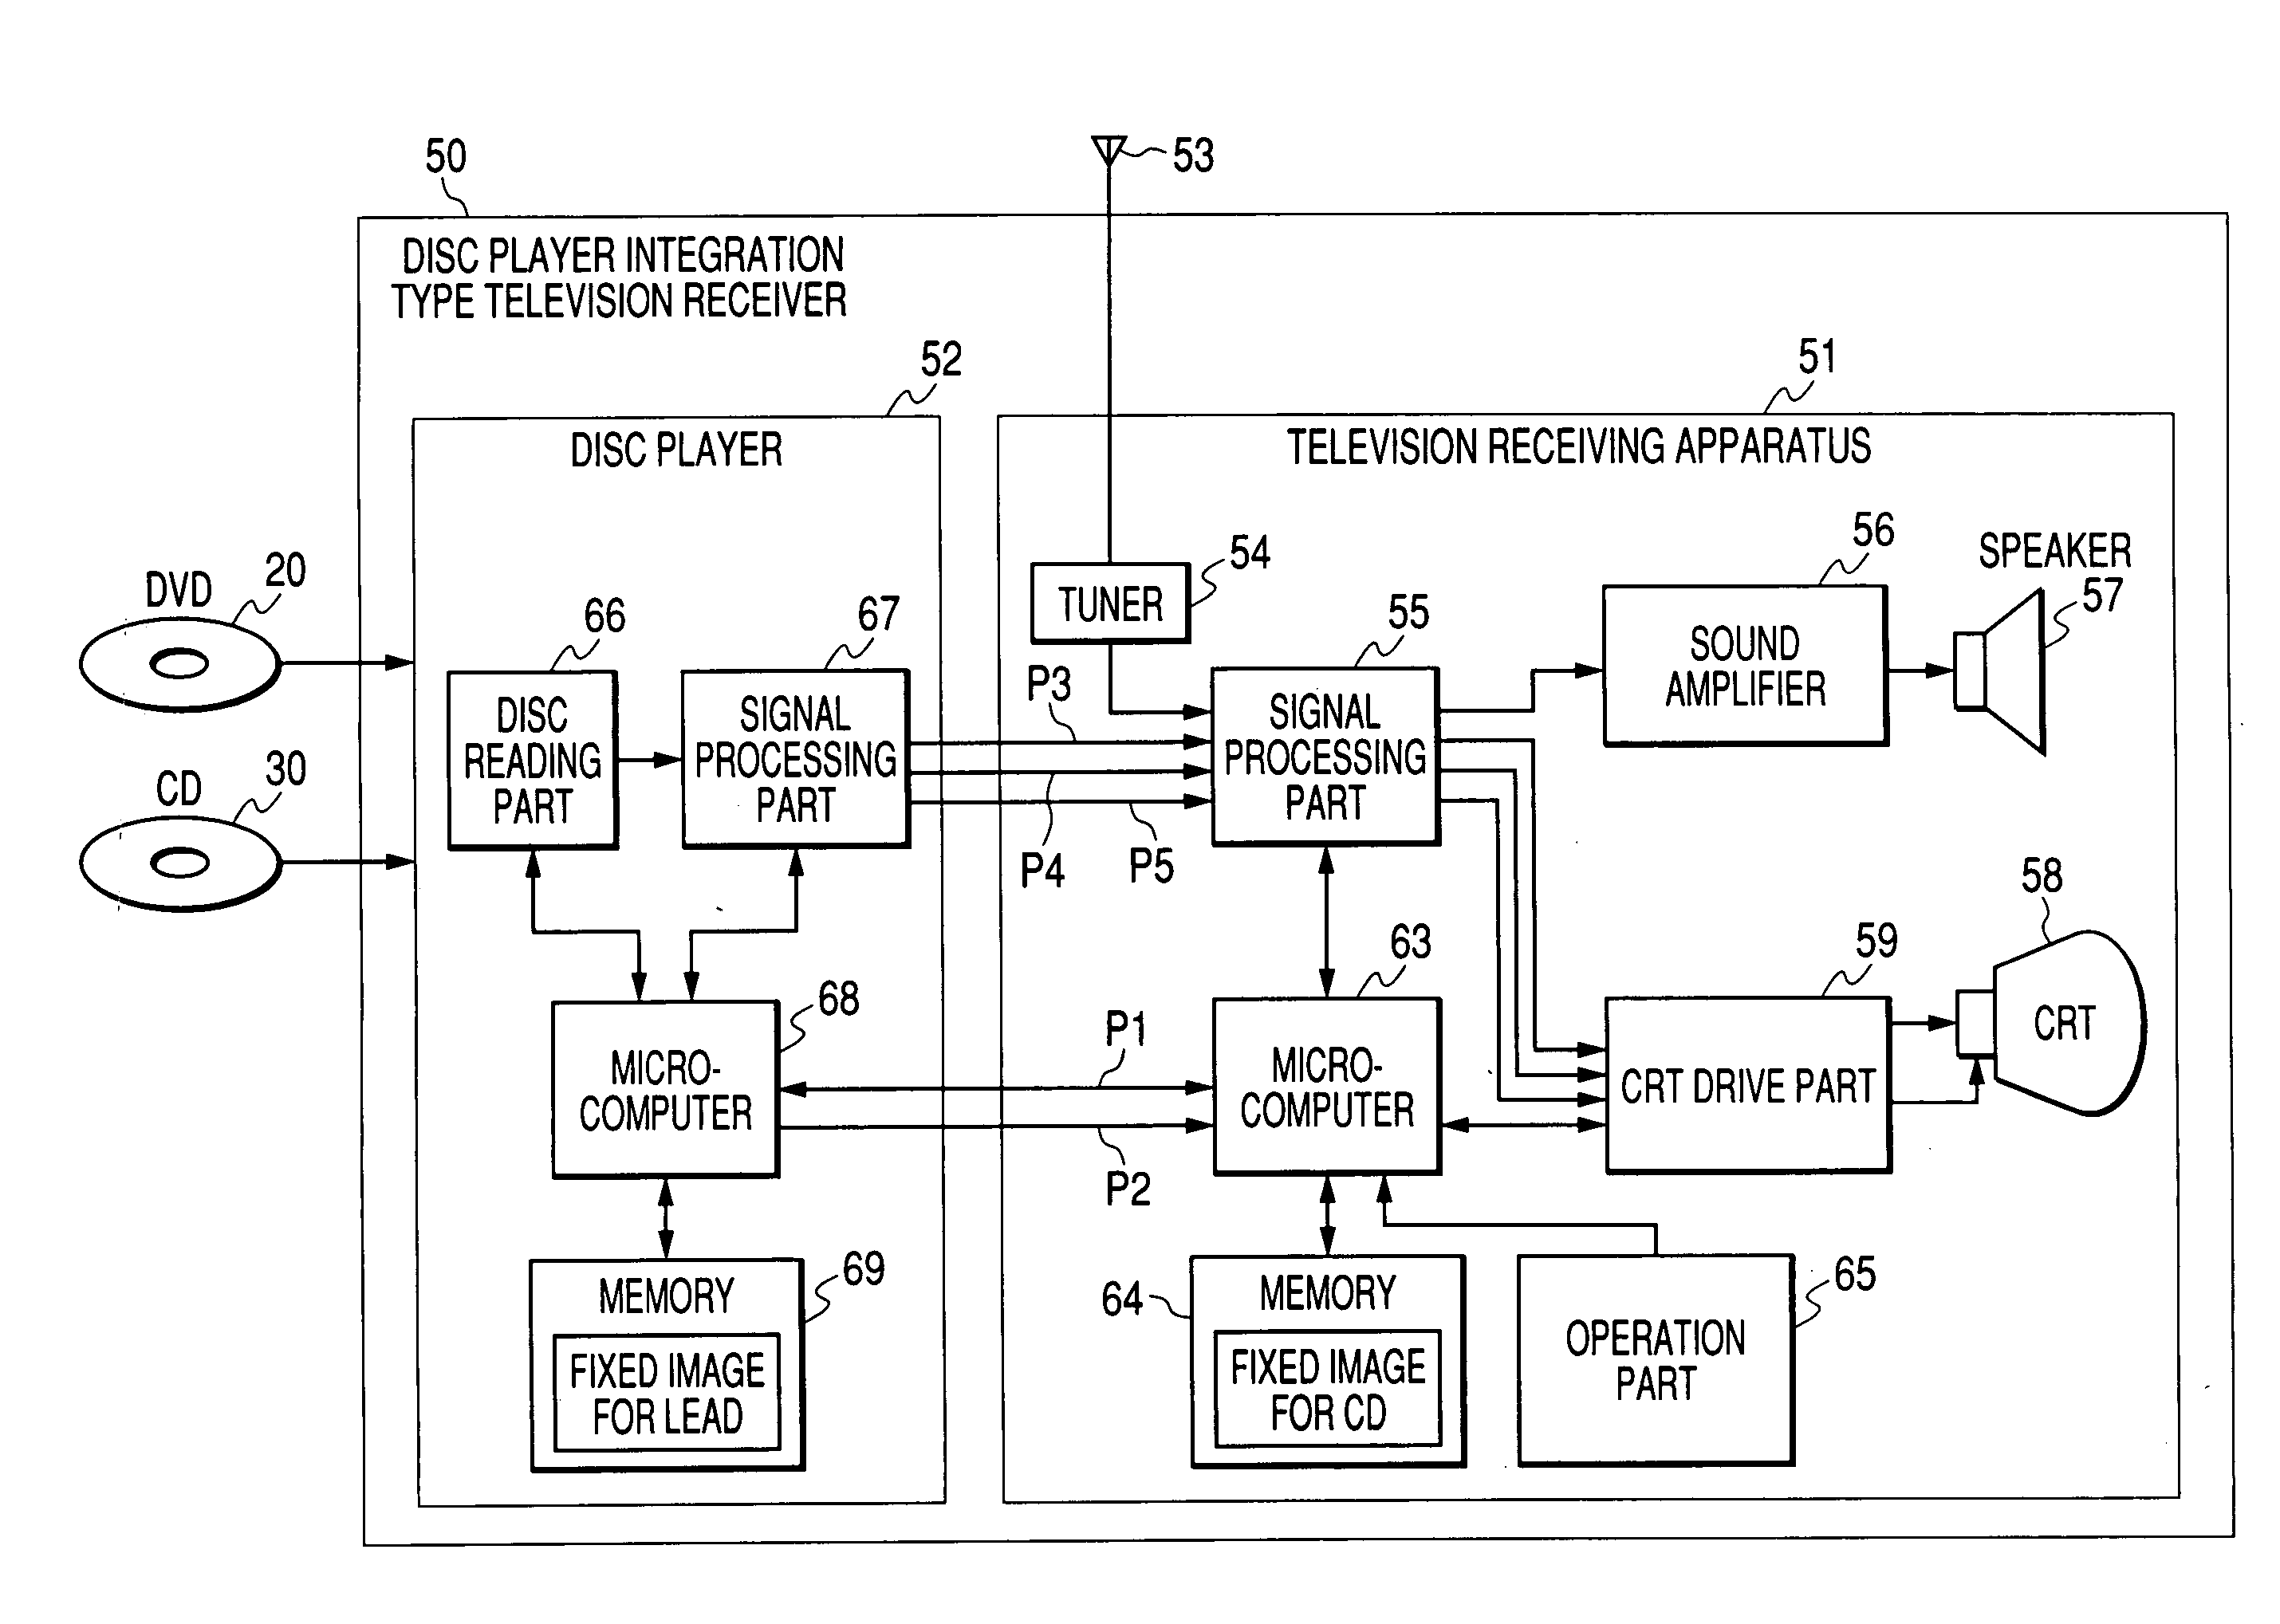 Disc player integration type television receiver